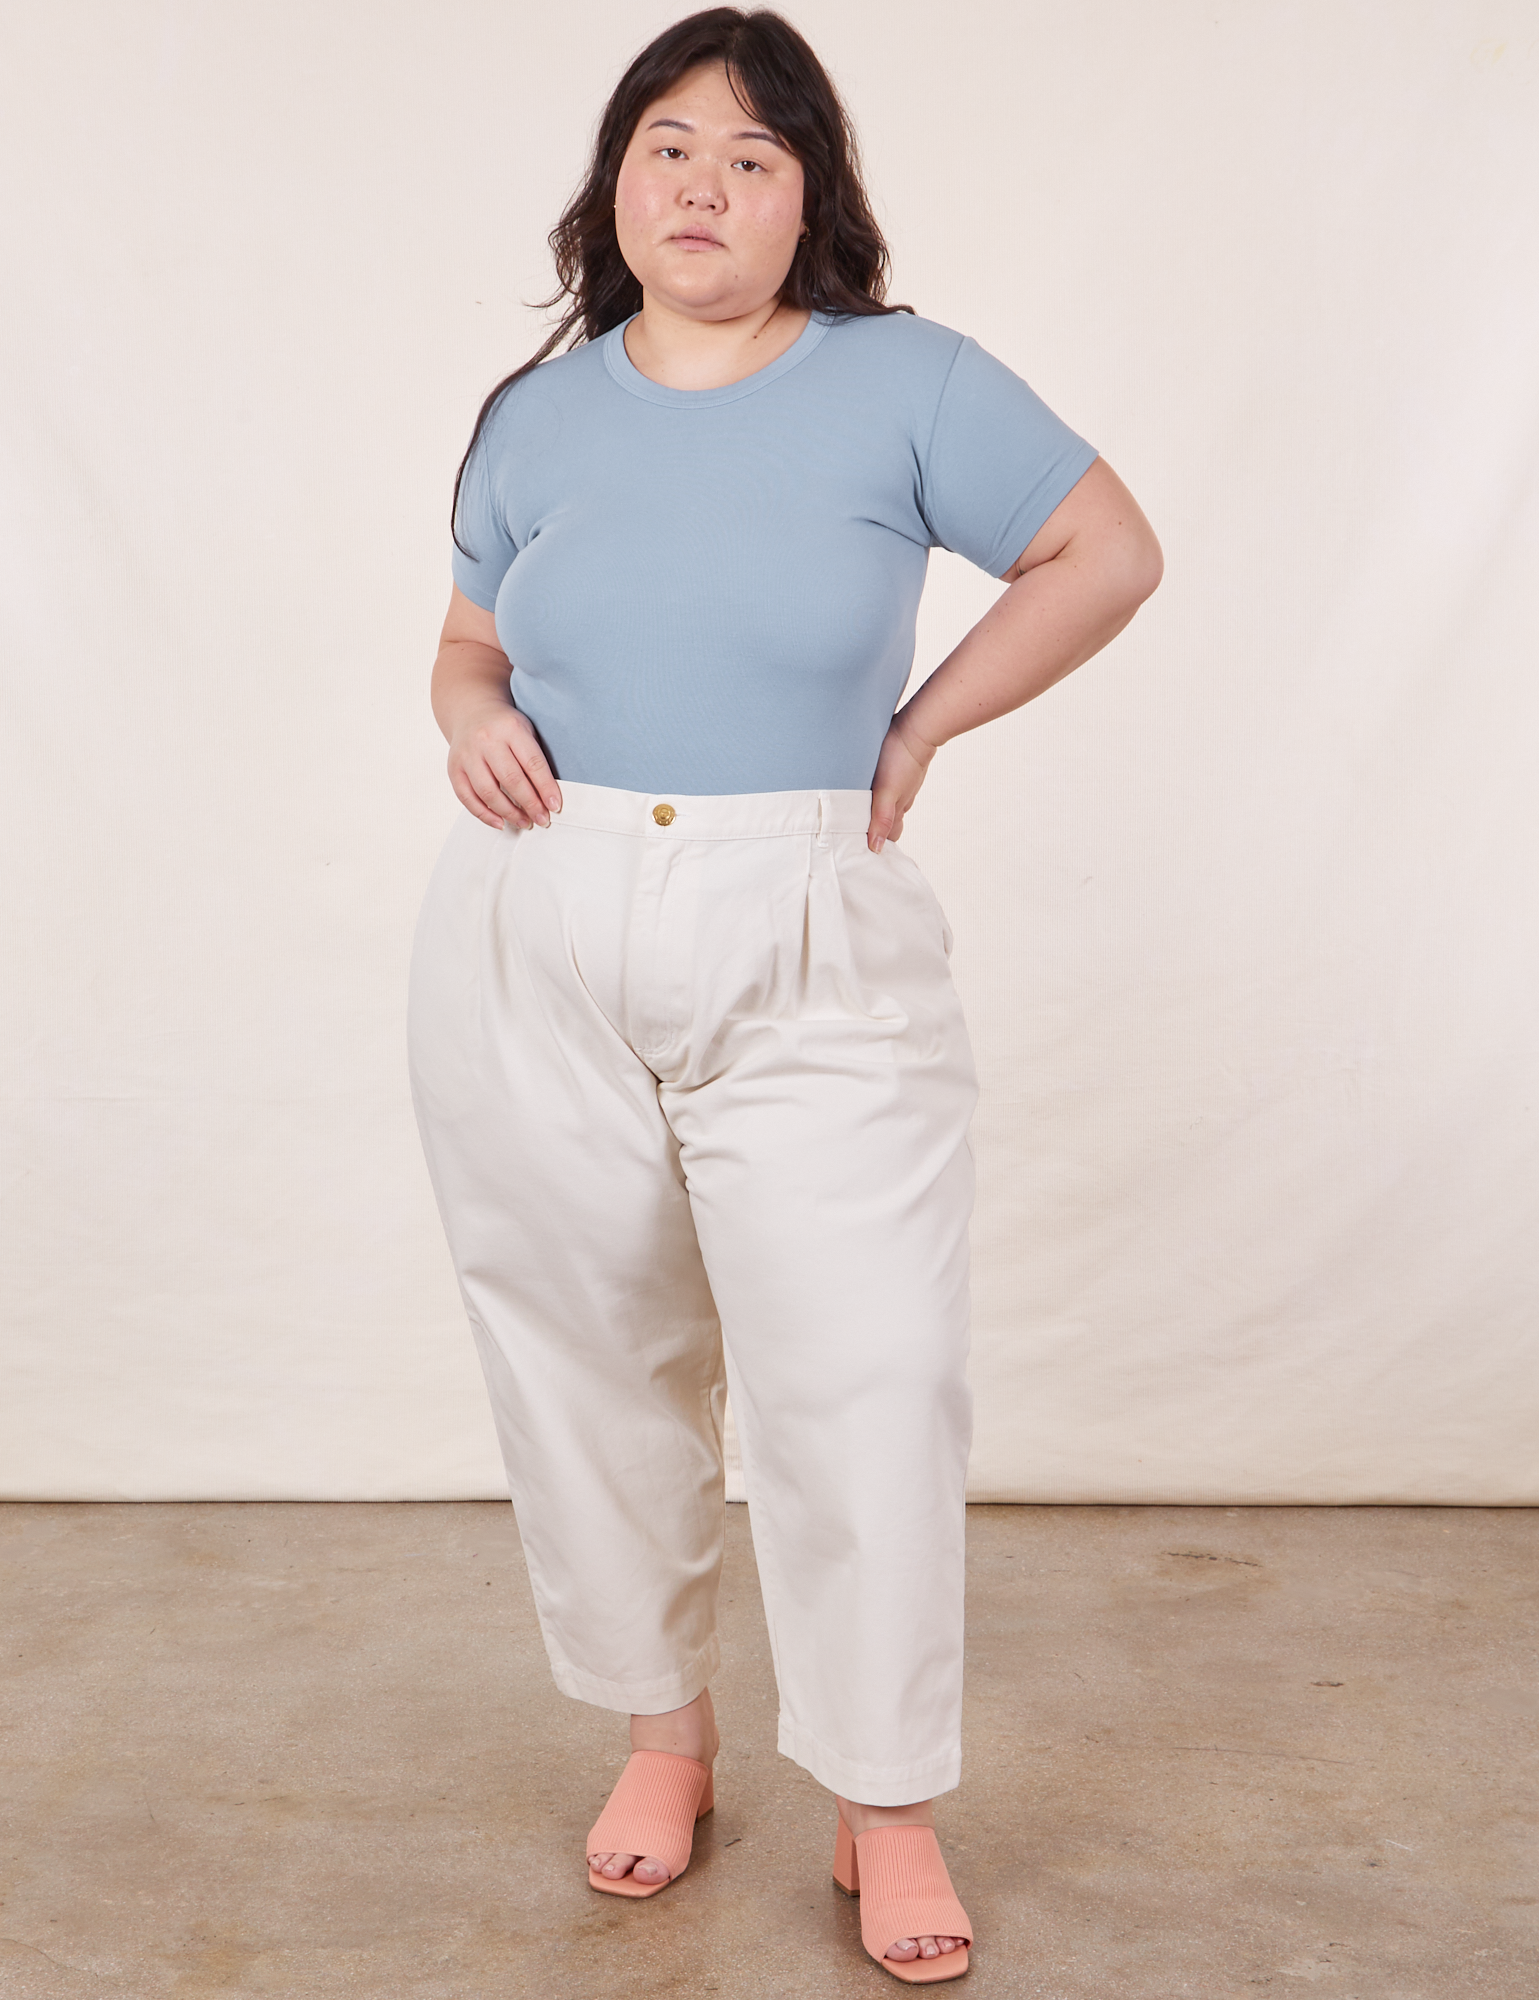 Ashley is wearing Baby Tee in Periwinkle and vintage off-white Trousers